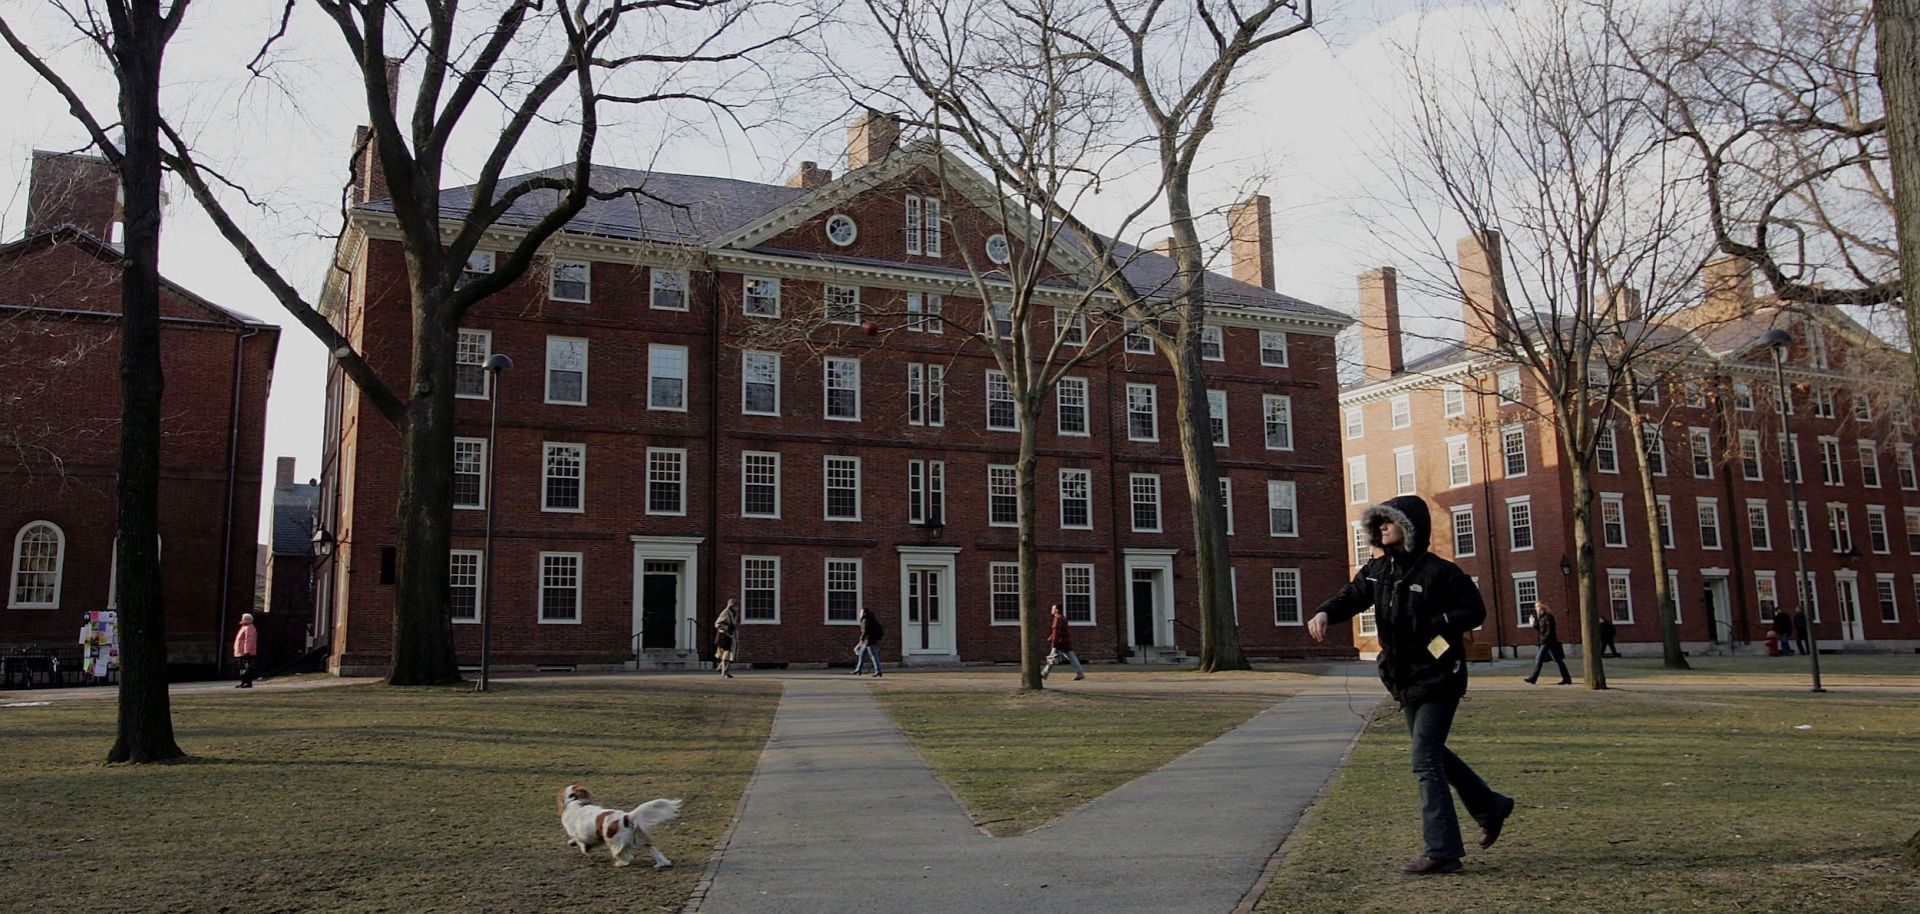 A Harvard education, and the prestige that goes with it, has made the elite U.S. university a favorite of wealthy foreign elites.